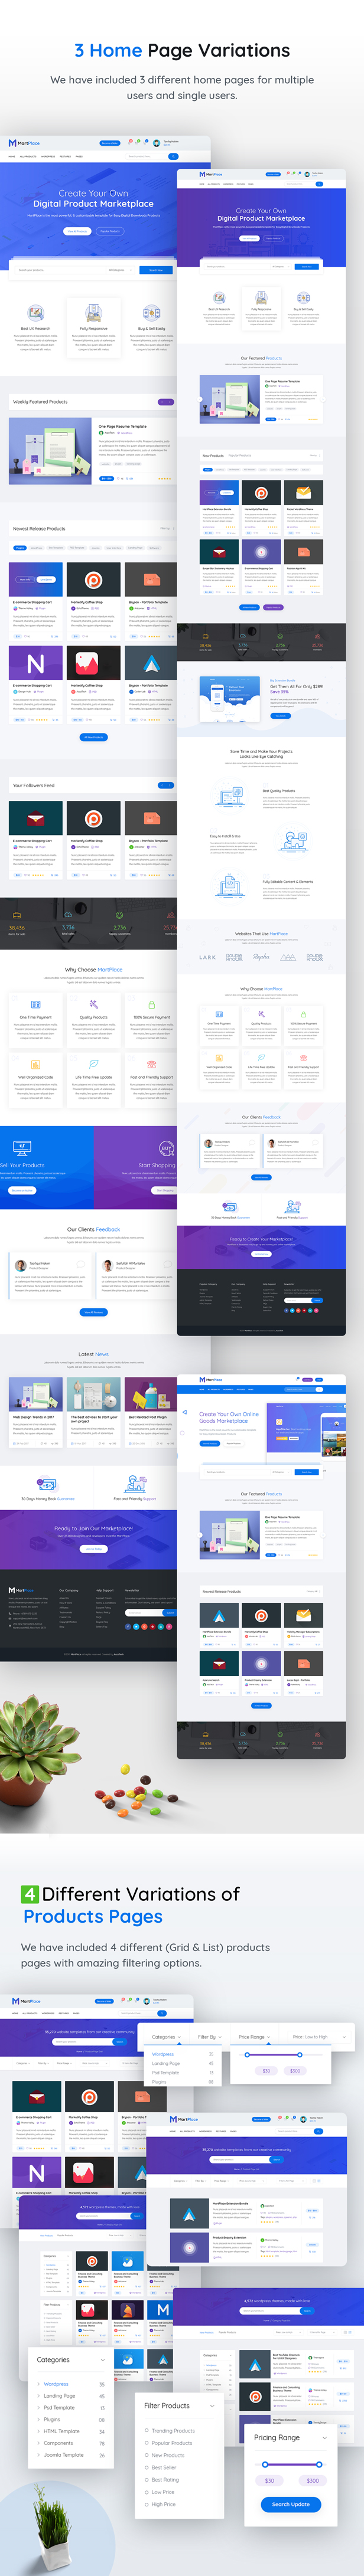 MartPlace - Multipurpose Online Marketplace HTML Template with Dashboard - 4